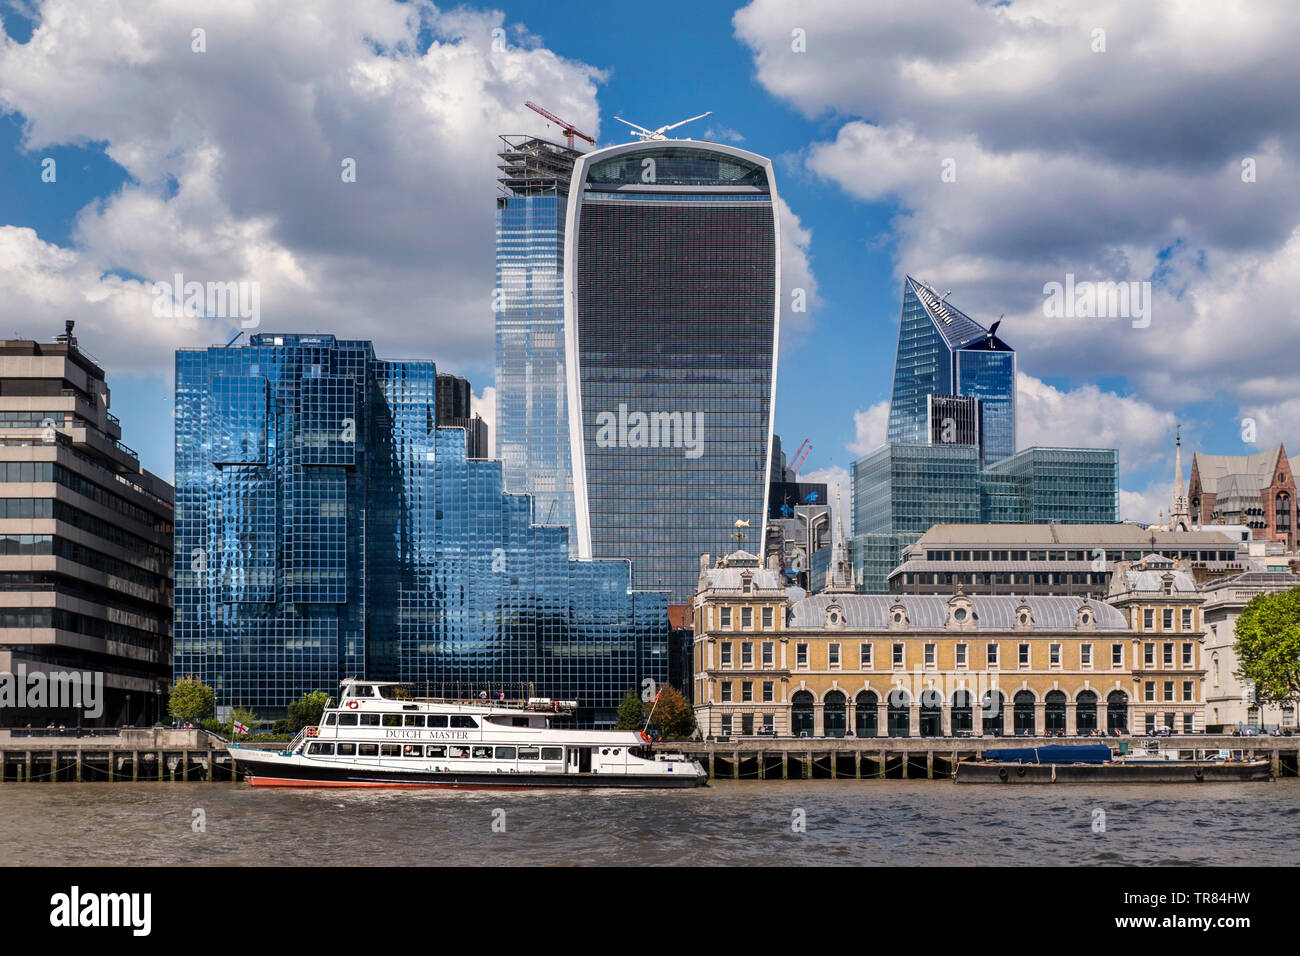 20 Fenchurch Street 'Walkie Talkie' building dominating skyline with Old Billingsgate and Northern & Shell buildings on The River Thames London EC3 UK Stock Photo